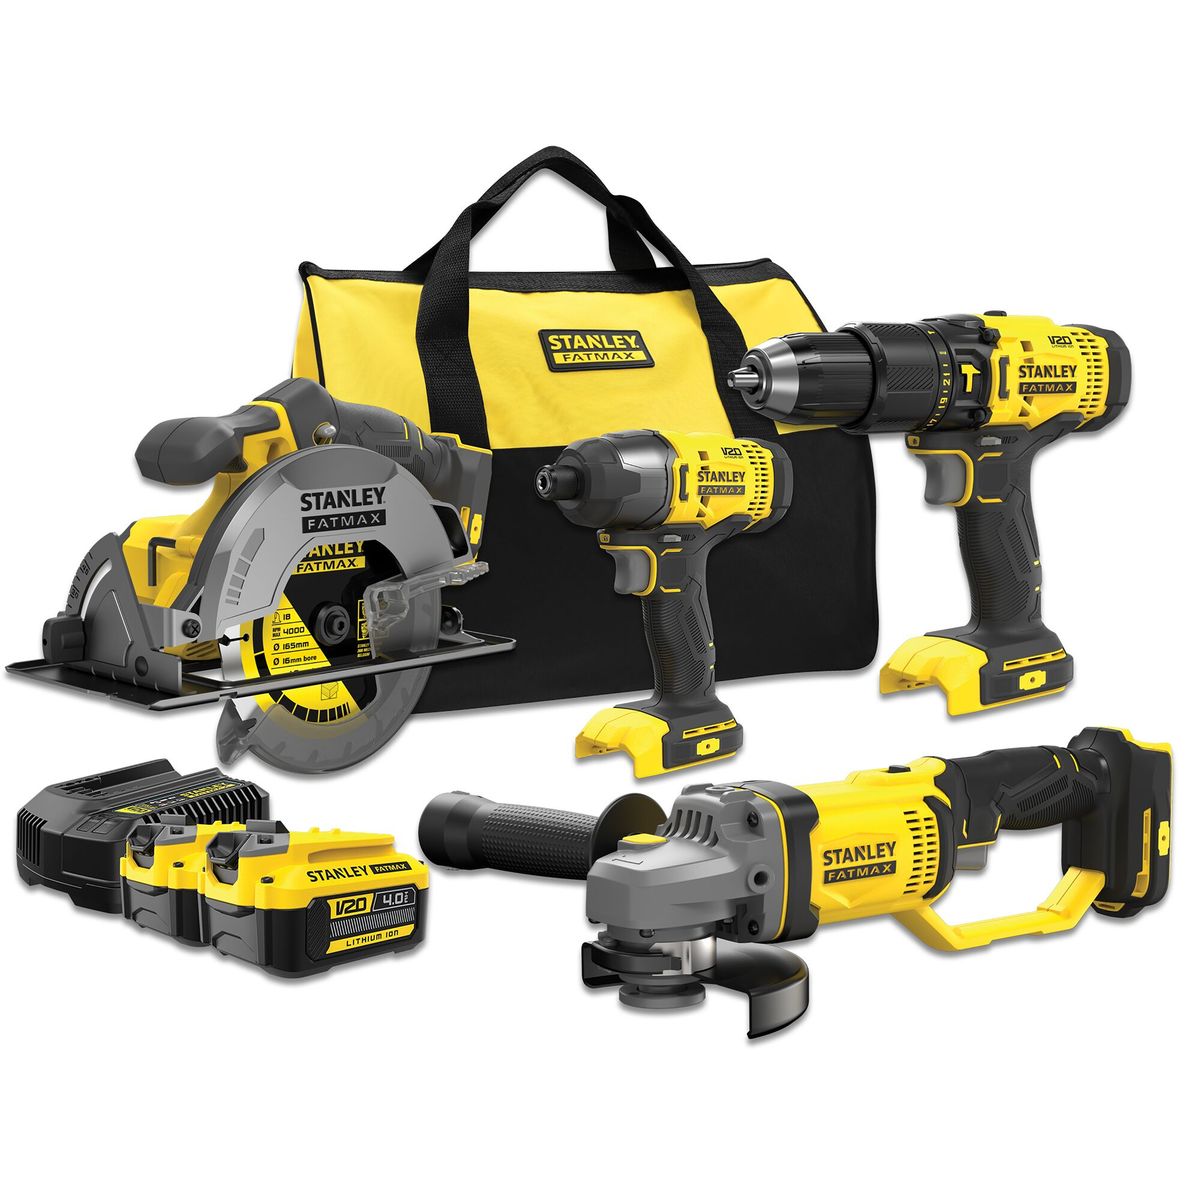 STANLEY FATMAX 18V Combo Hammer + Impact Drill + Circular Saw + Grinder